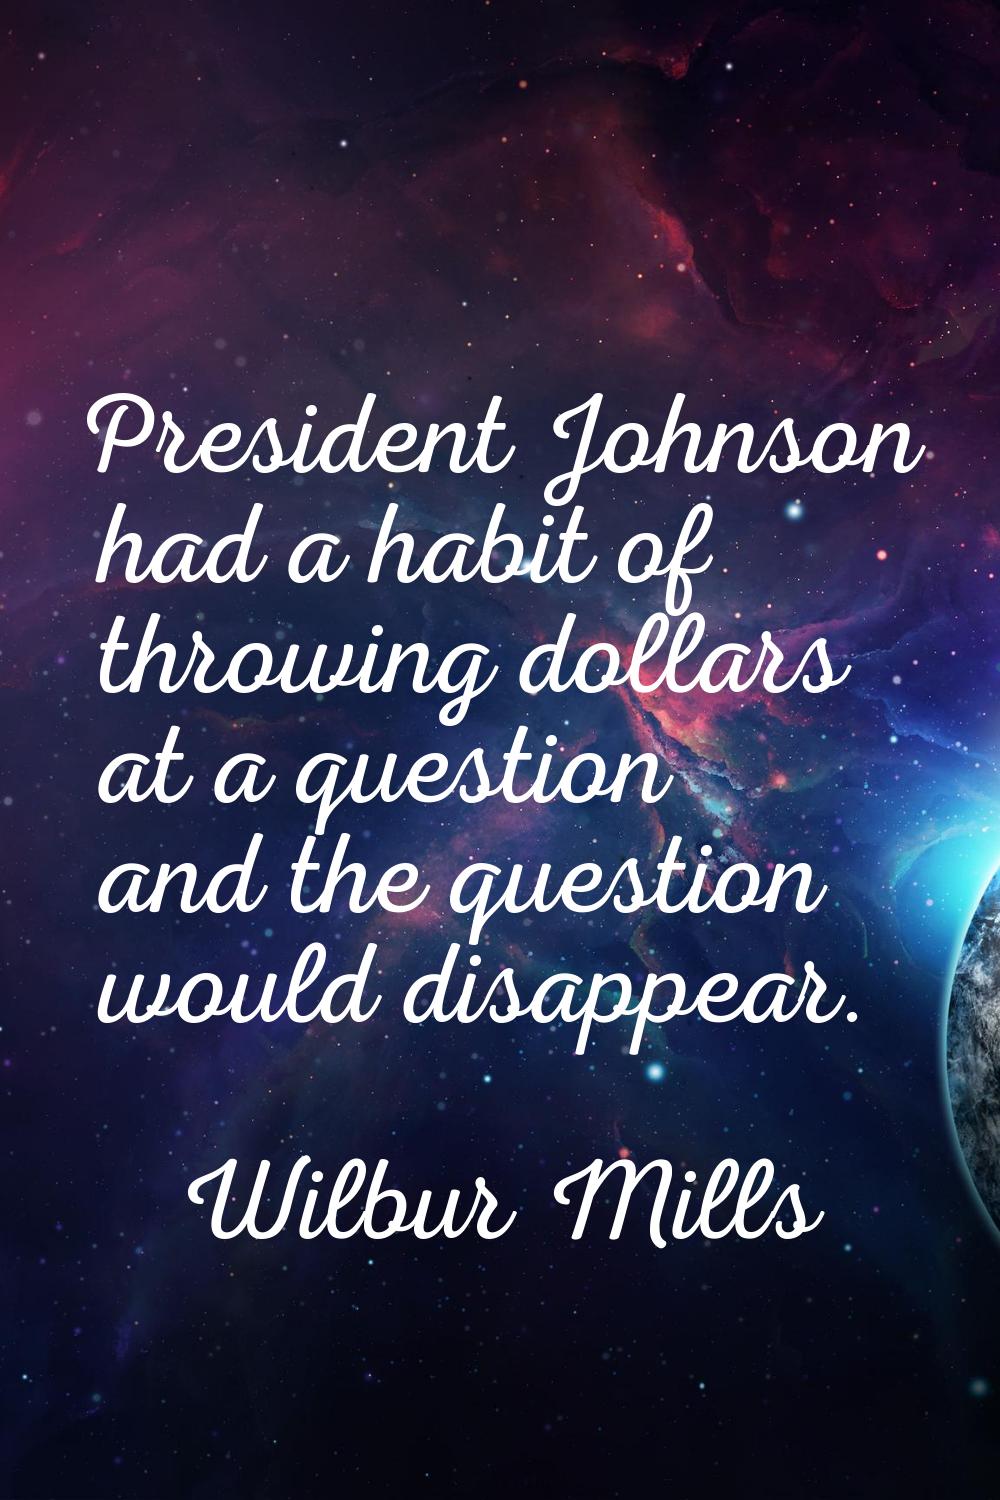 President Johnson had a habit of throwing dollars at a question and the question would disappear.